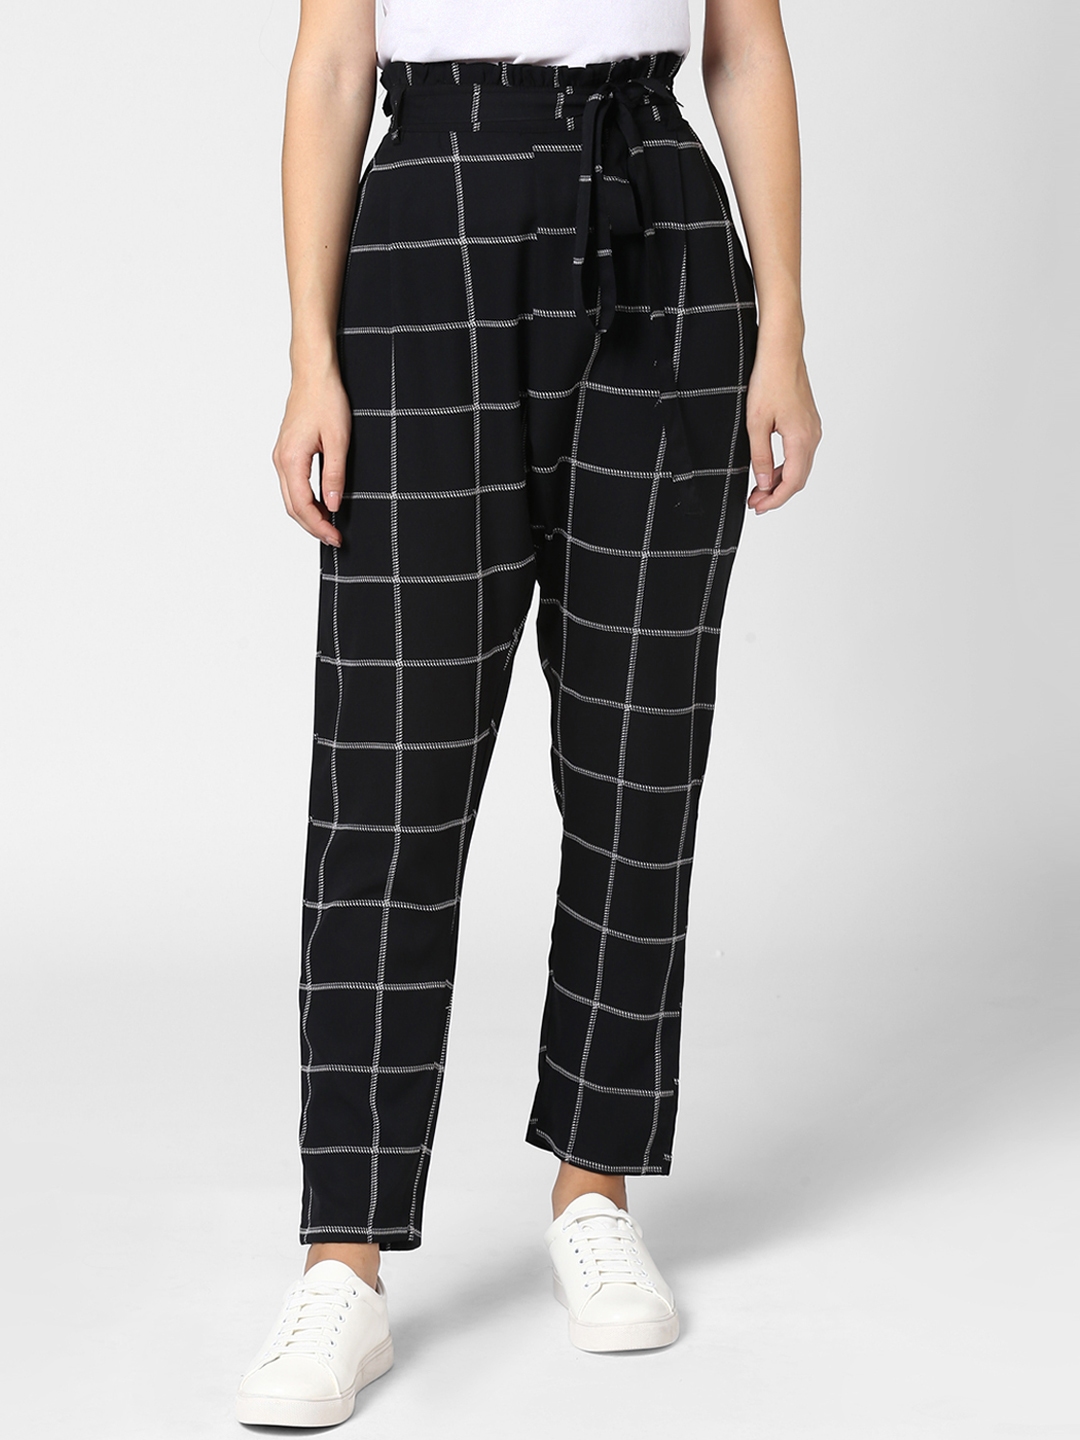 Check With Belll Bottom Multicolor Women Checked Trousers Waist Size 2840